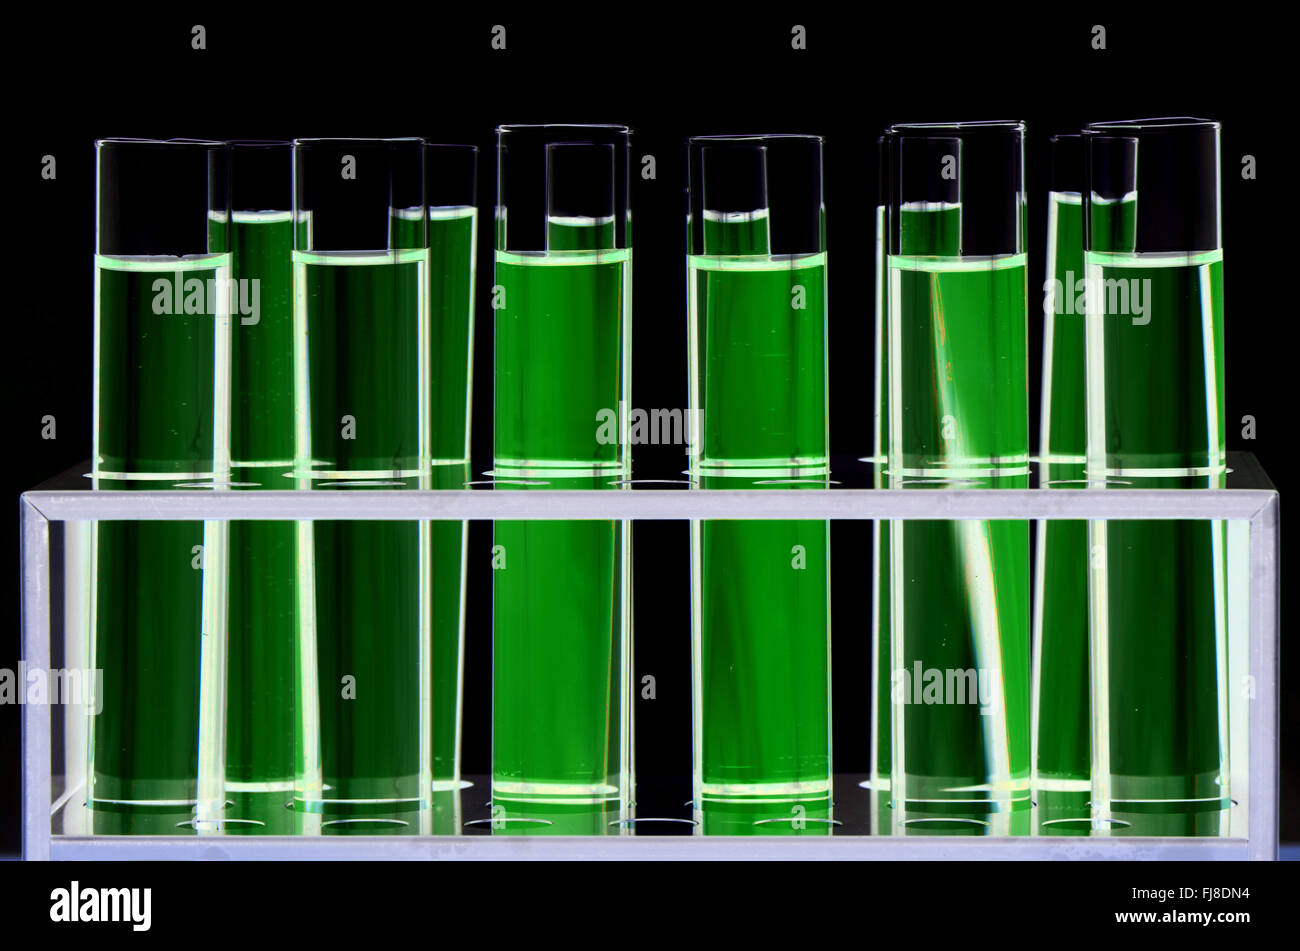 Test Tube in Close-up on Black Background. Stock Photo